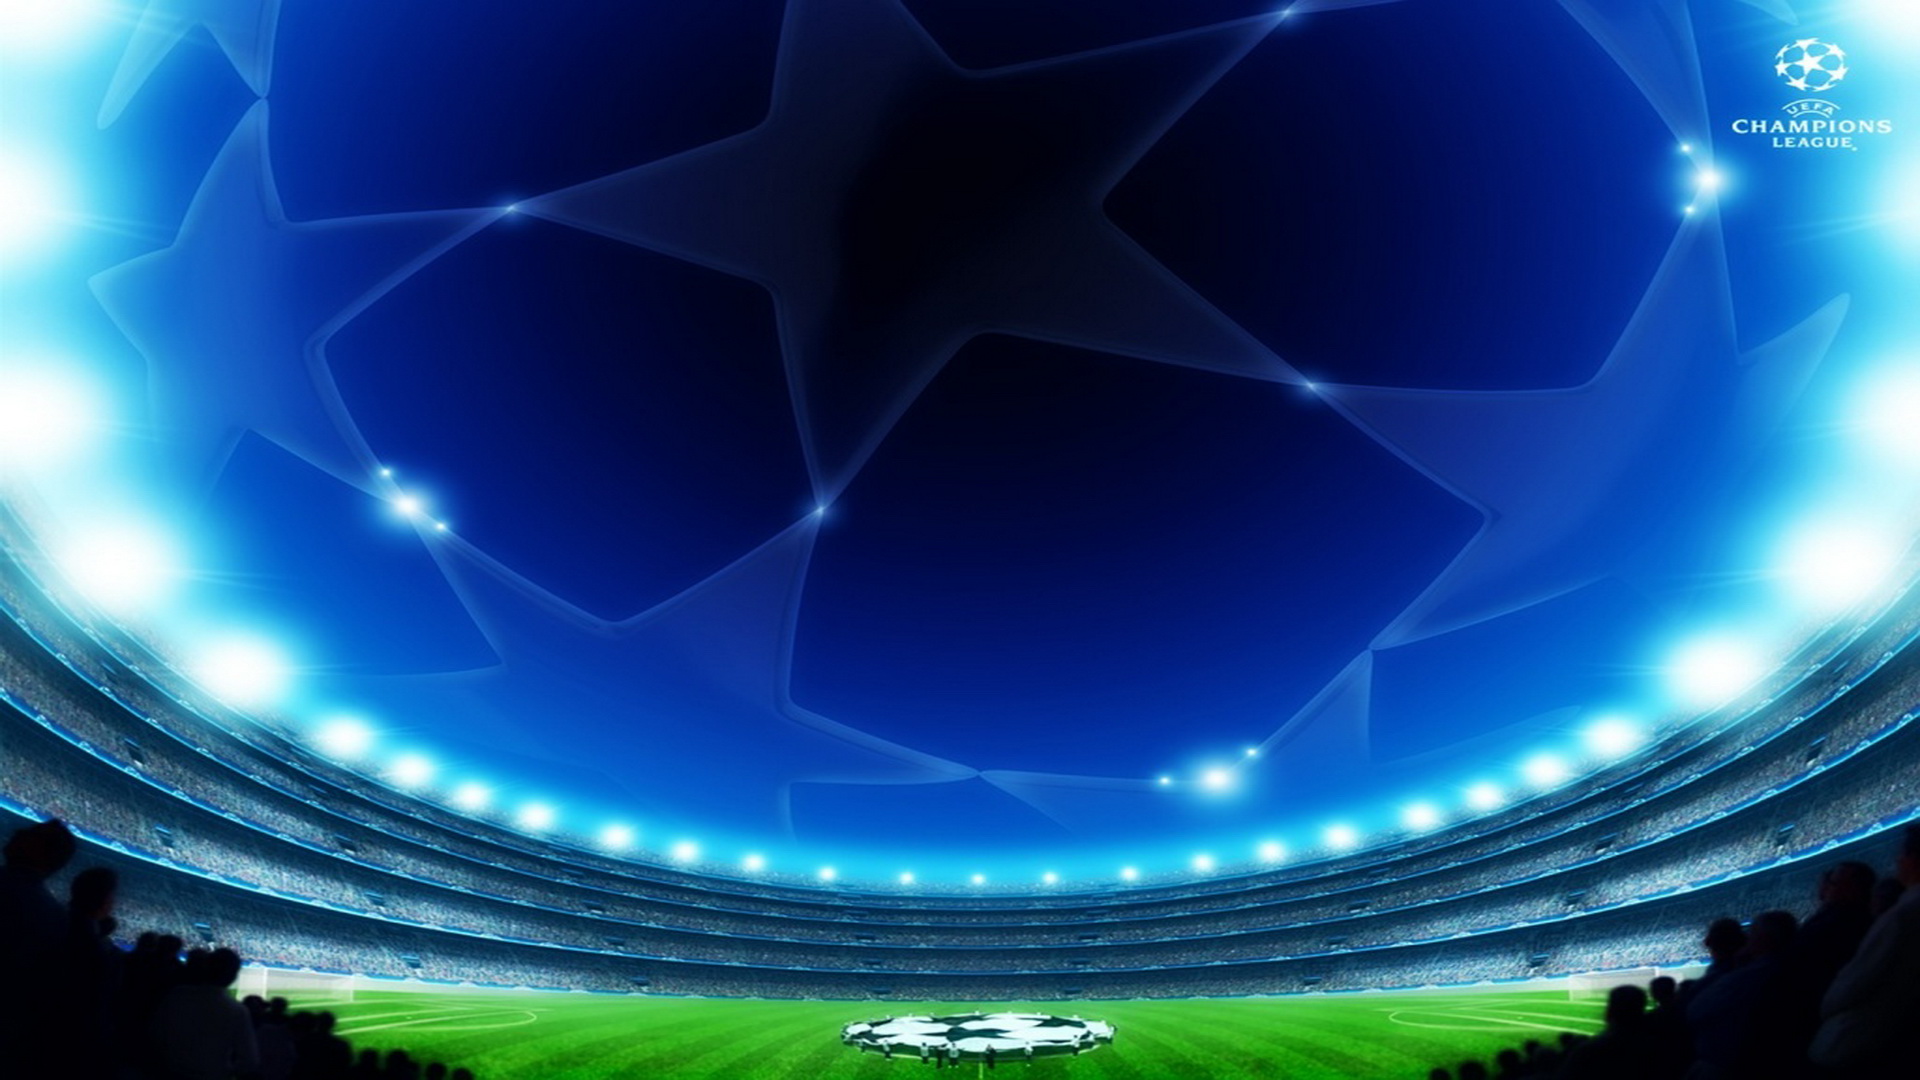 Wallpapers HD Backgrounds uefa champions league high wallpapers